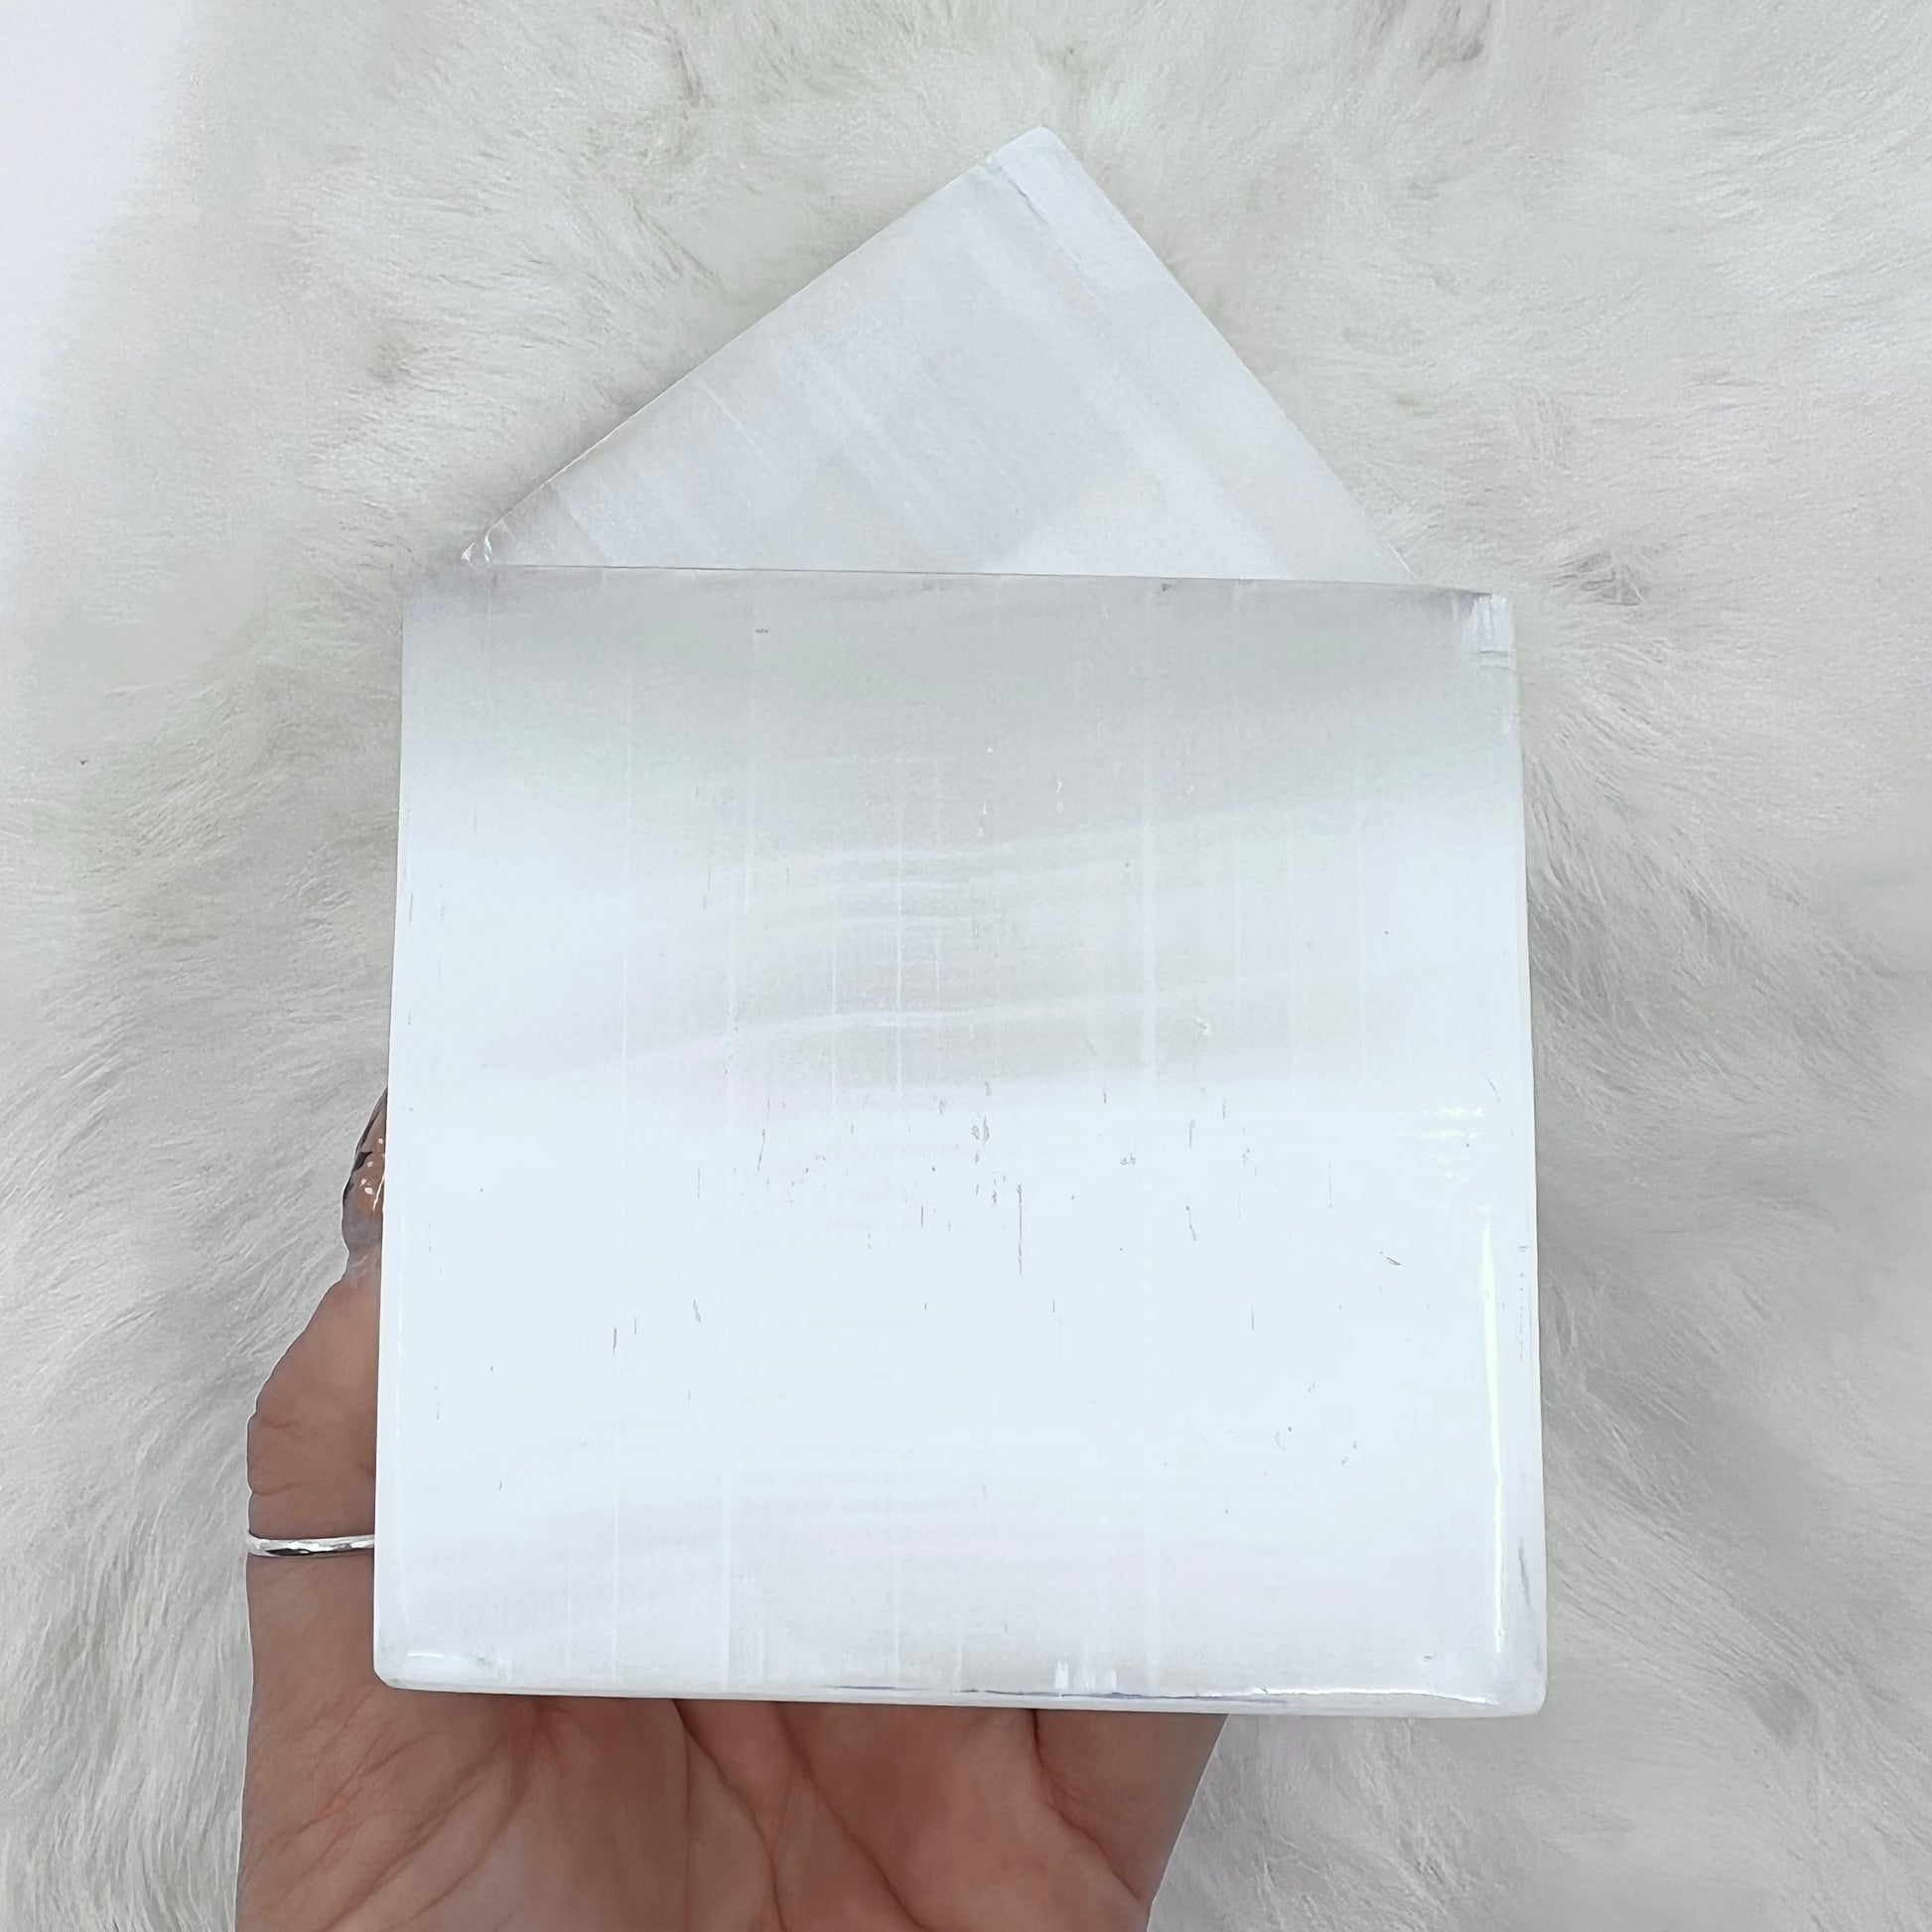 Selenite Charging Thick Square Plate - Energy Clearing